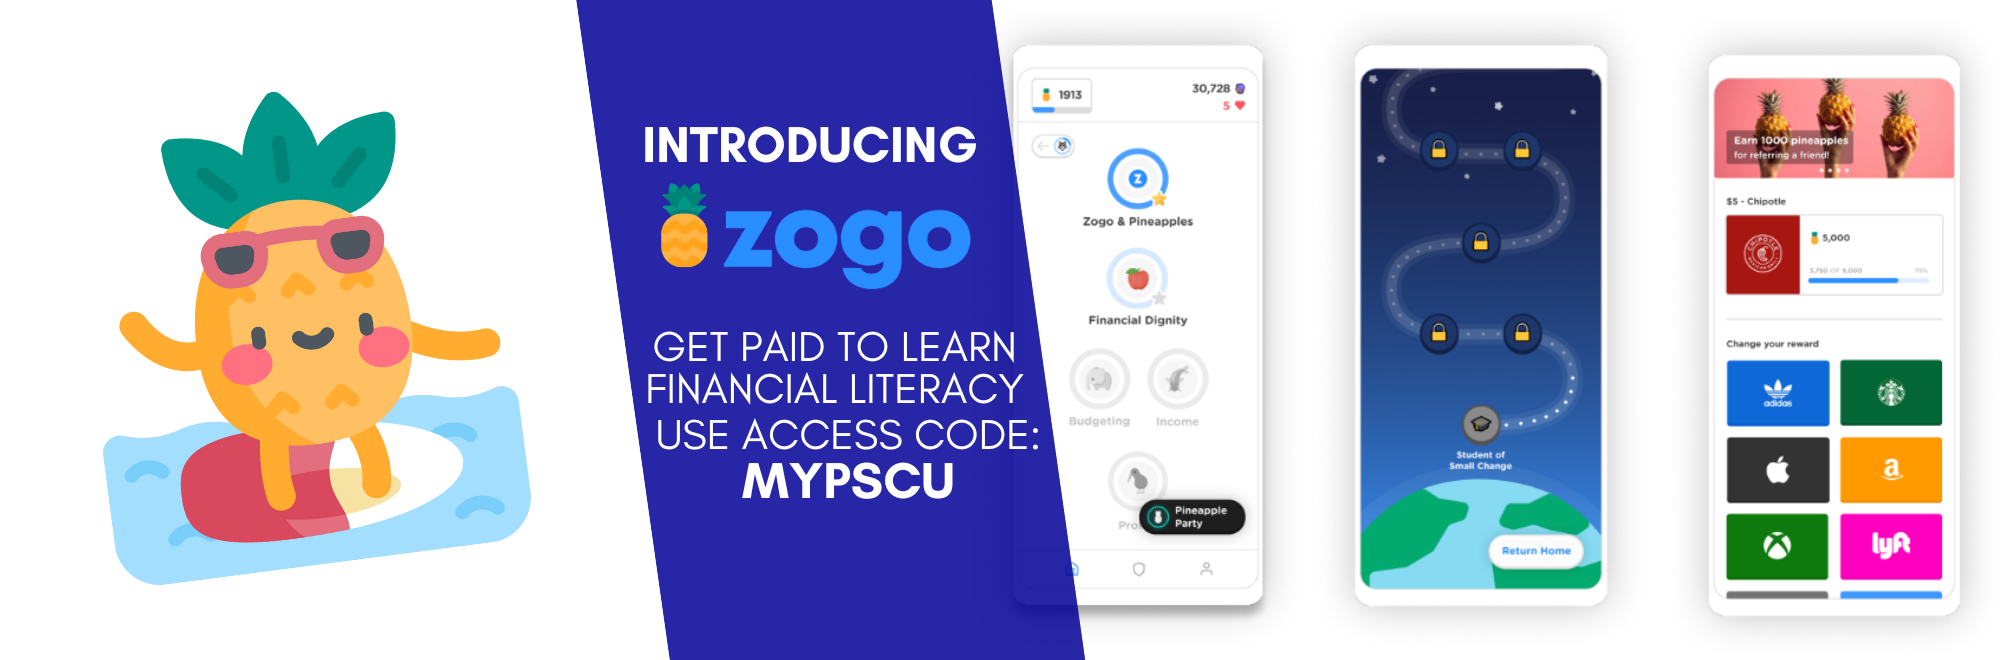 Introducing Zogo Get Paid to Learn Financial Literacy Use Access Code MYPSCU